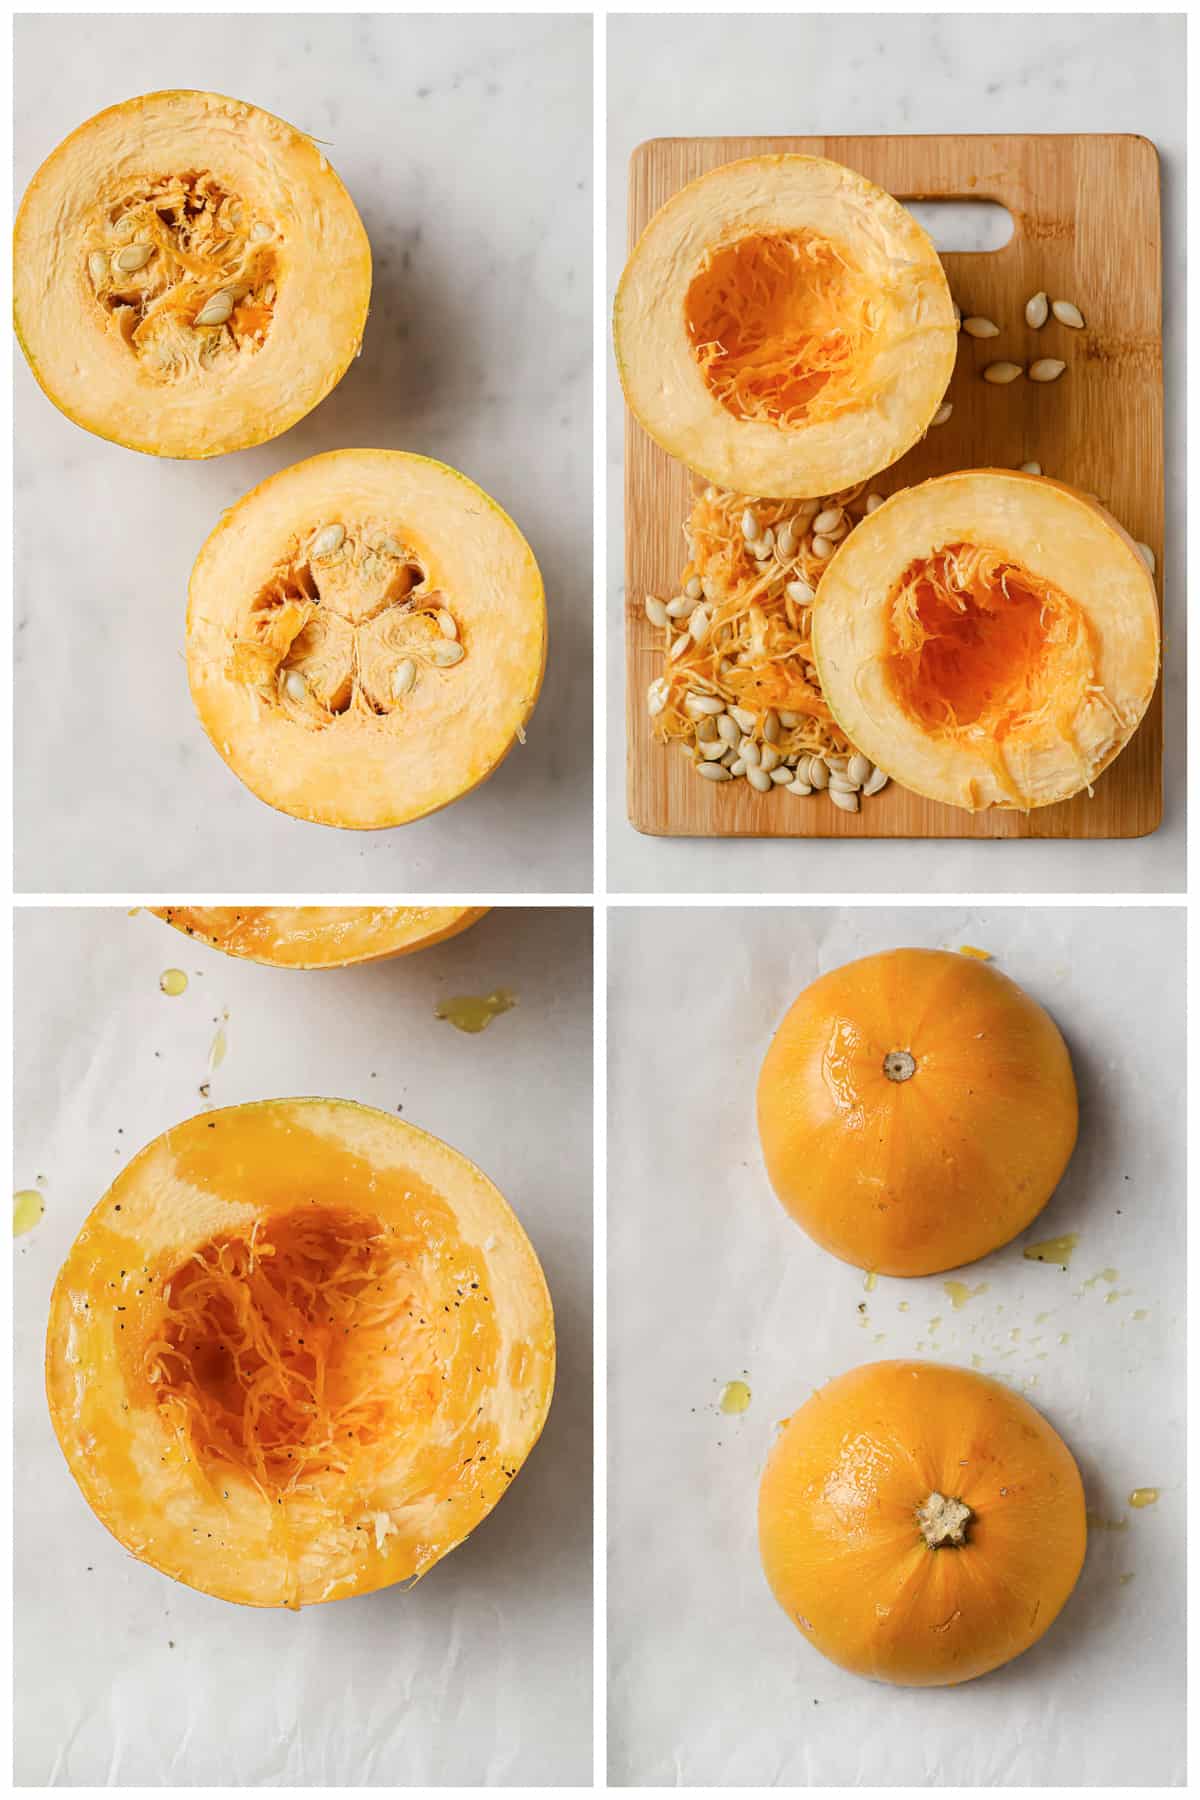 step by step photo instructions on how to prepare spaghetti squash in the oven